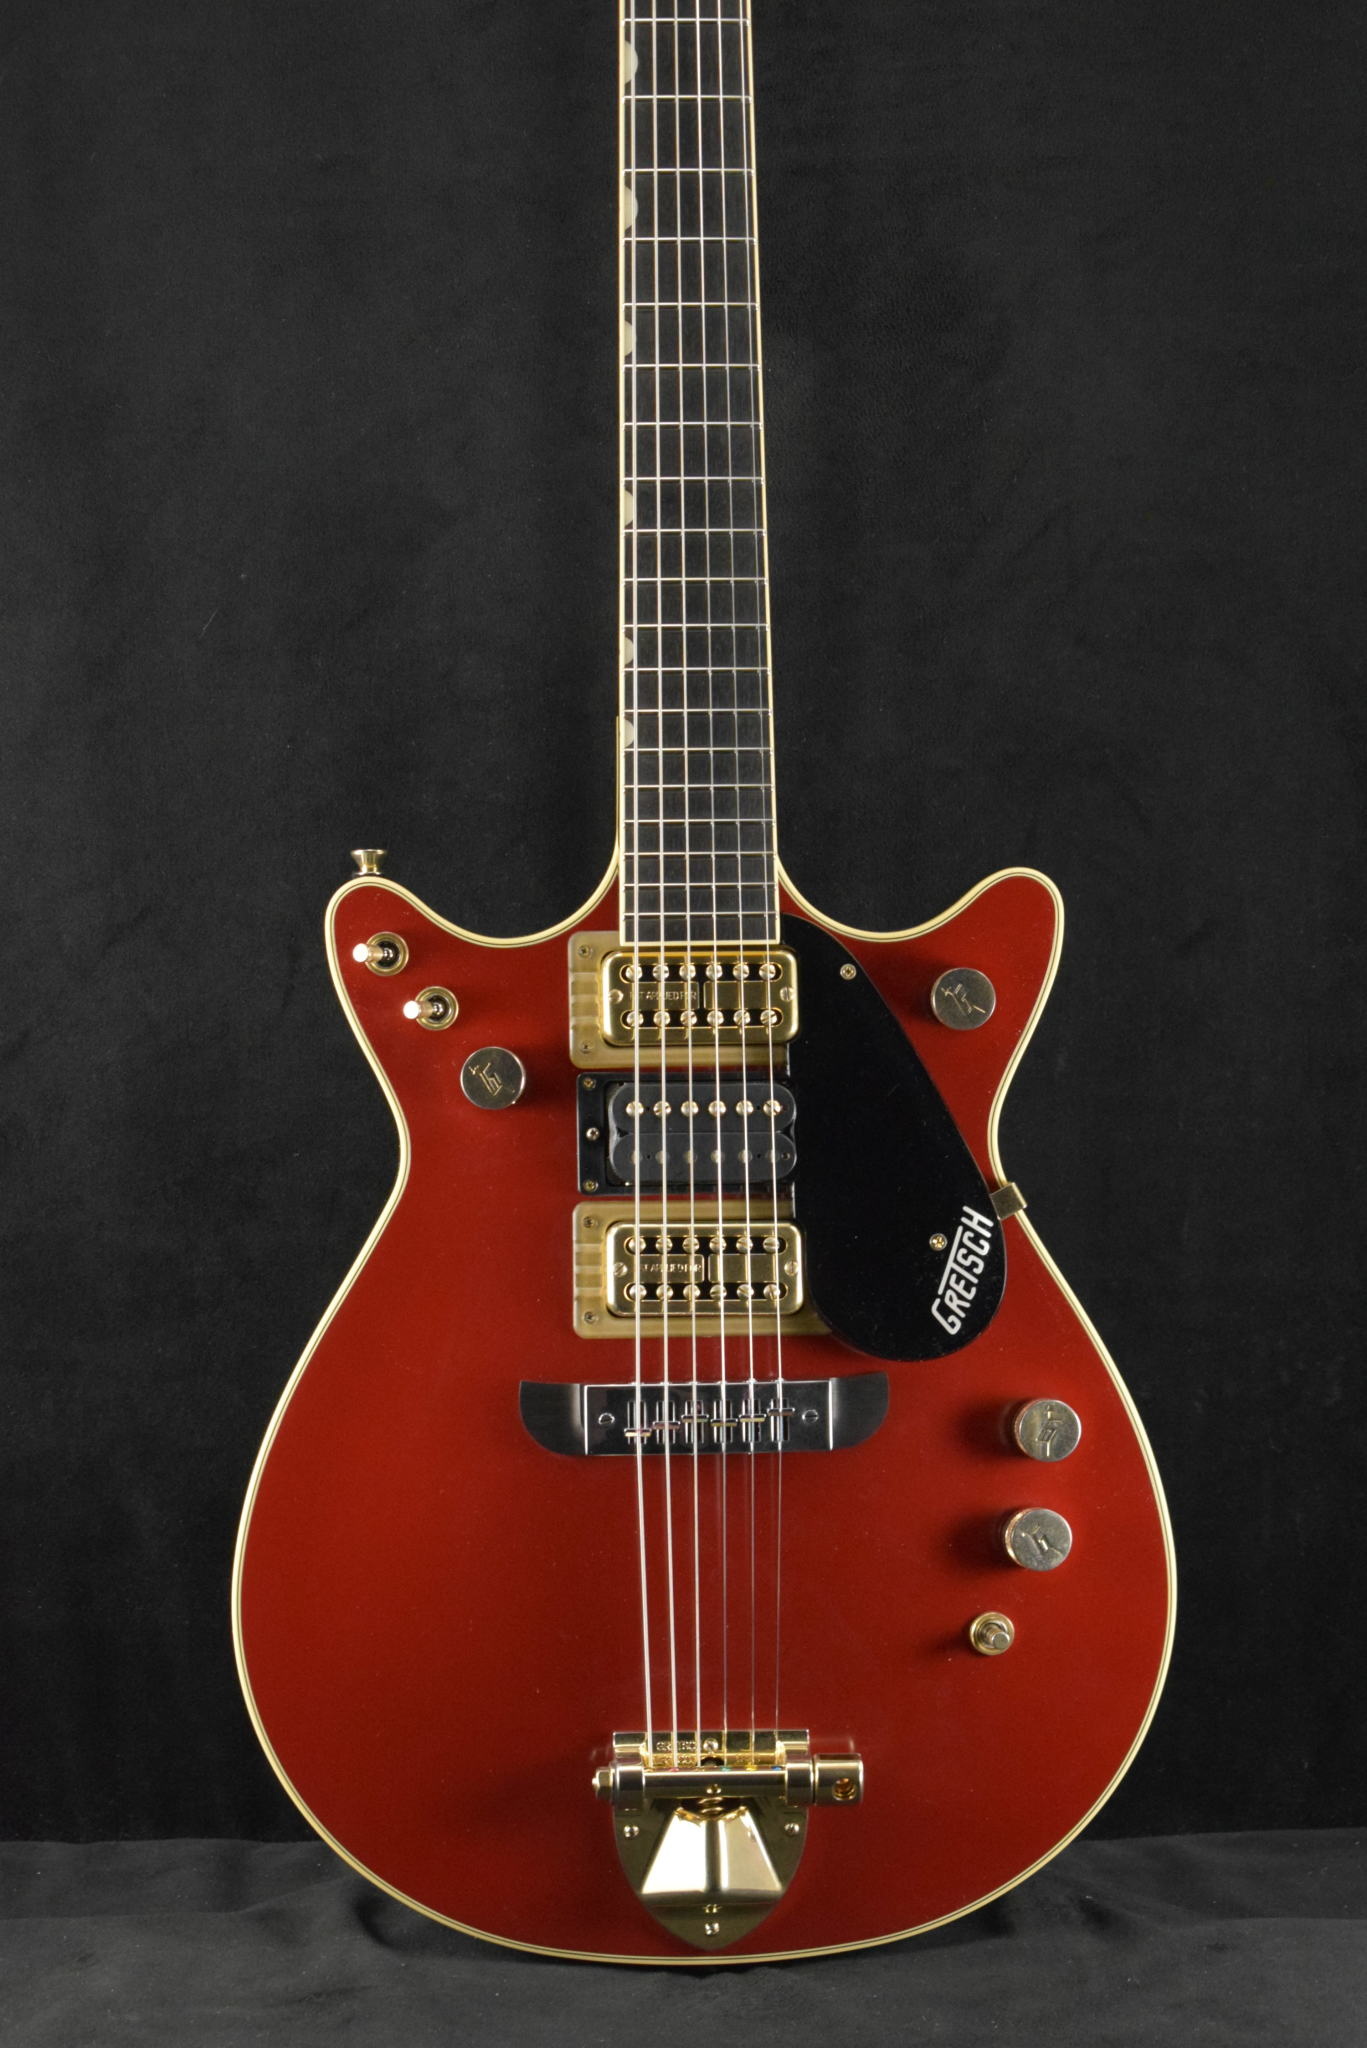 Gretsch Gretsch G6131-MY-RB Limited Edition Malcolm Young Signature Jet Vintage Firebird Red